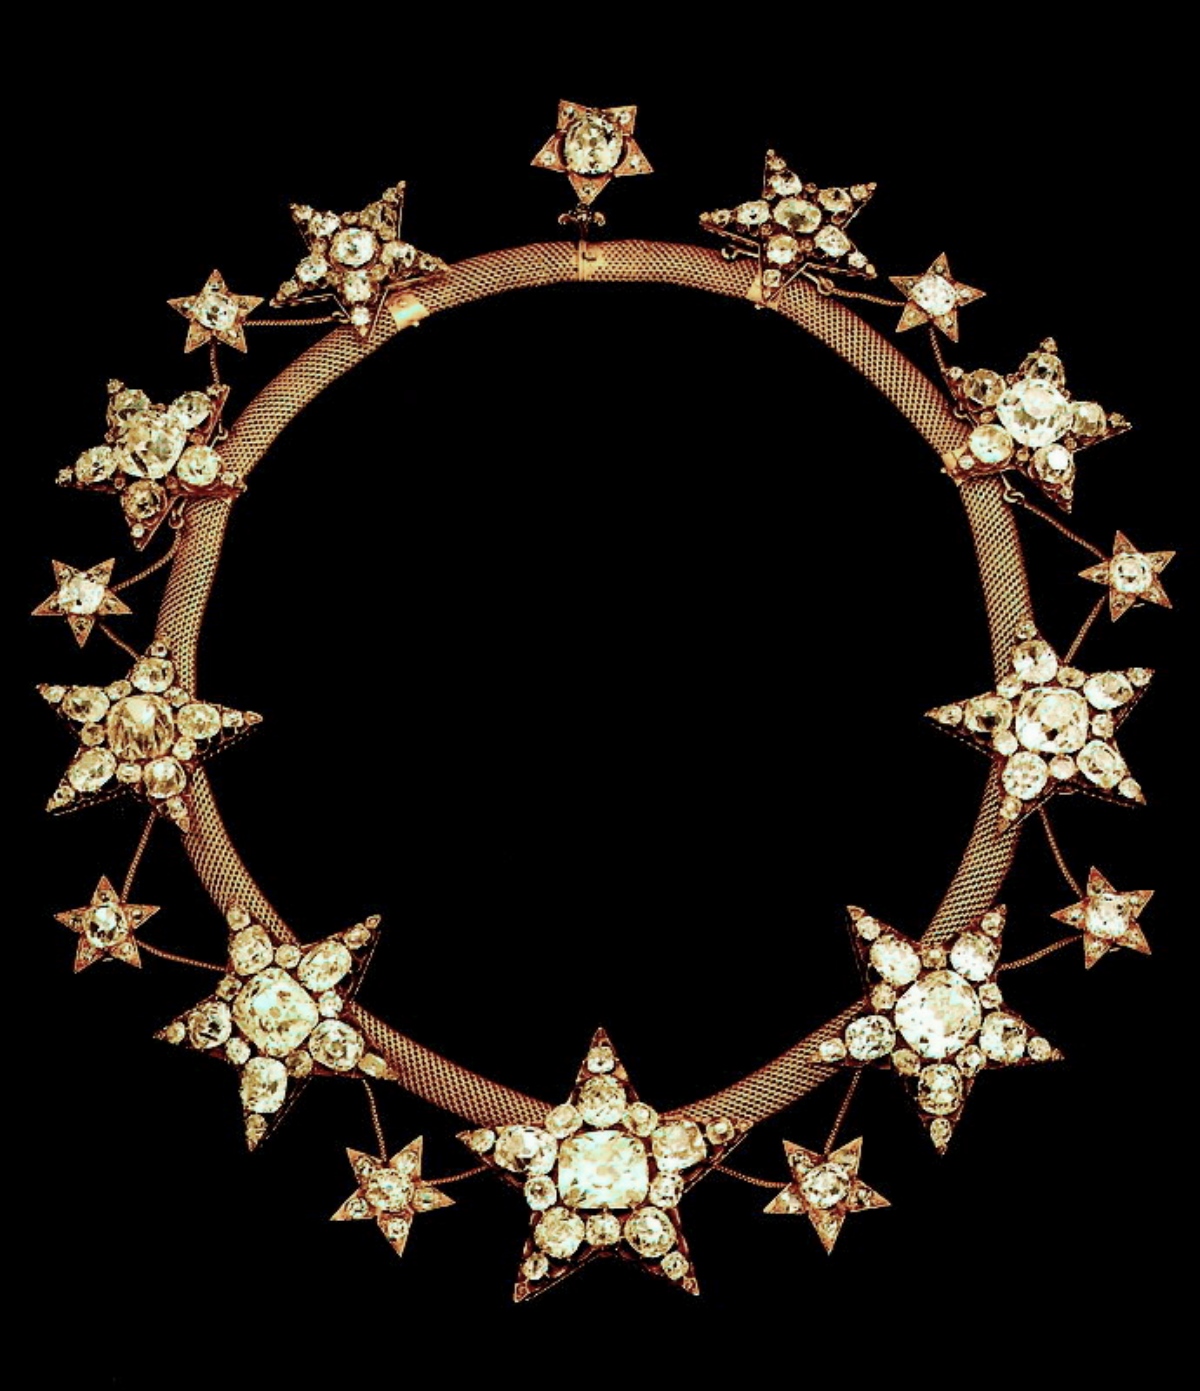 Necklace of the stars Portuguese crown jewels